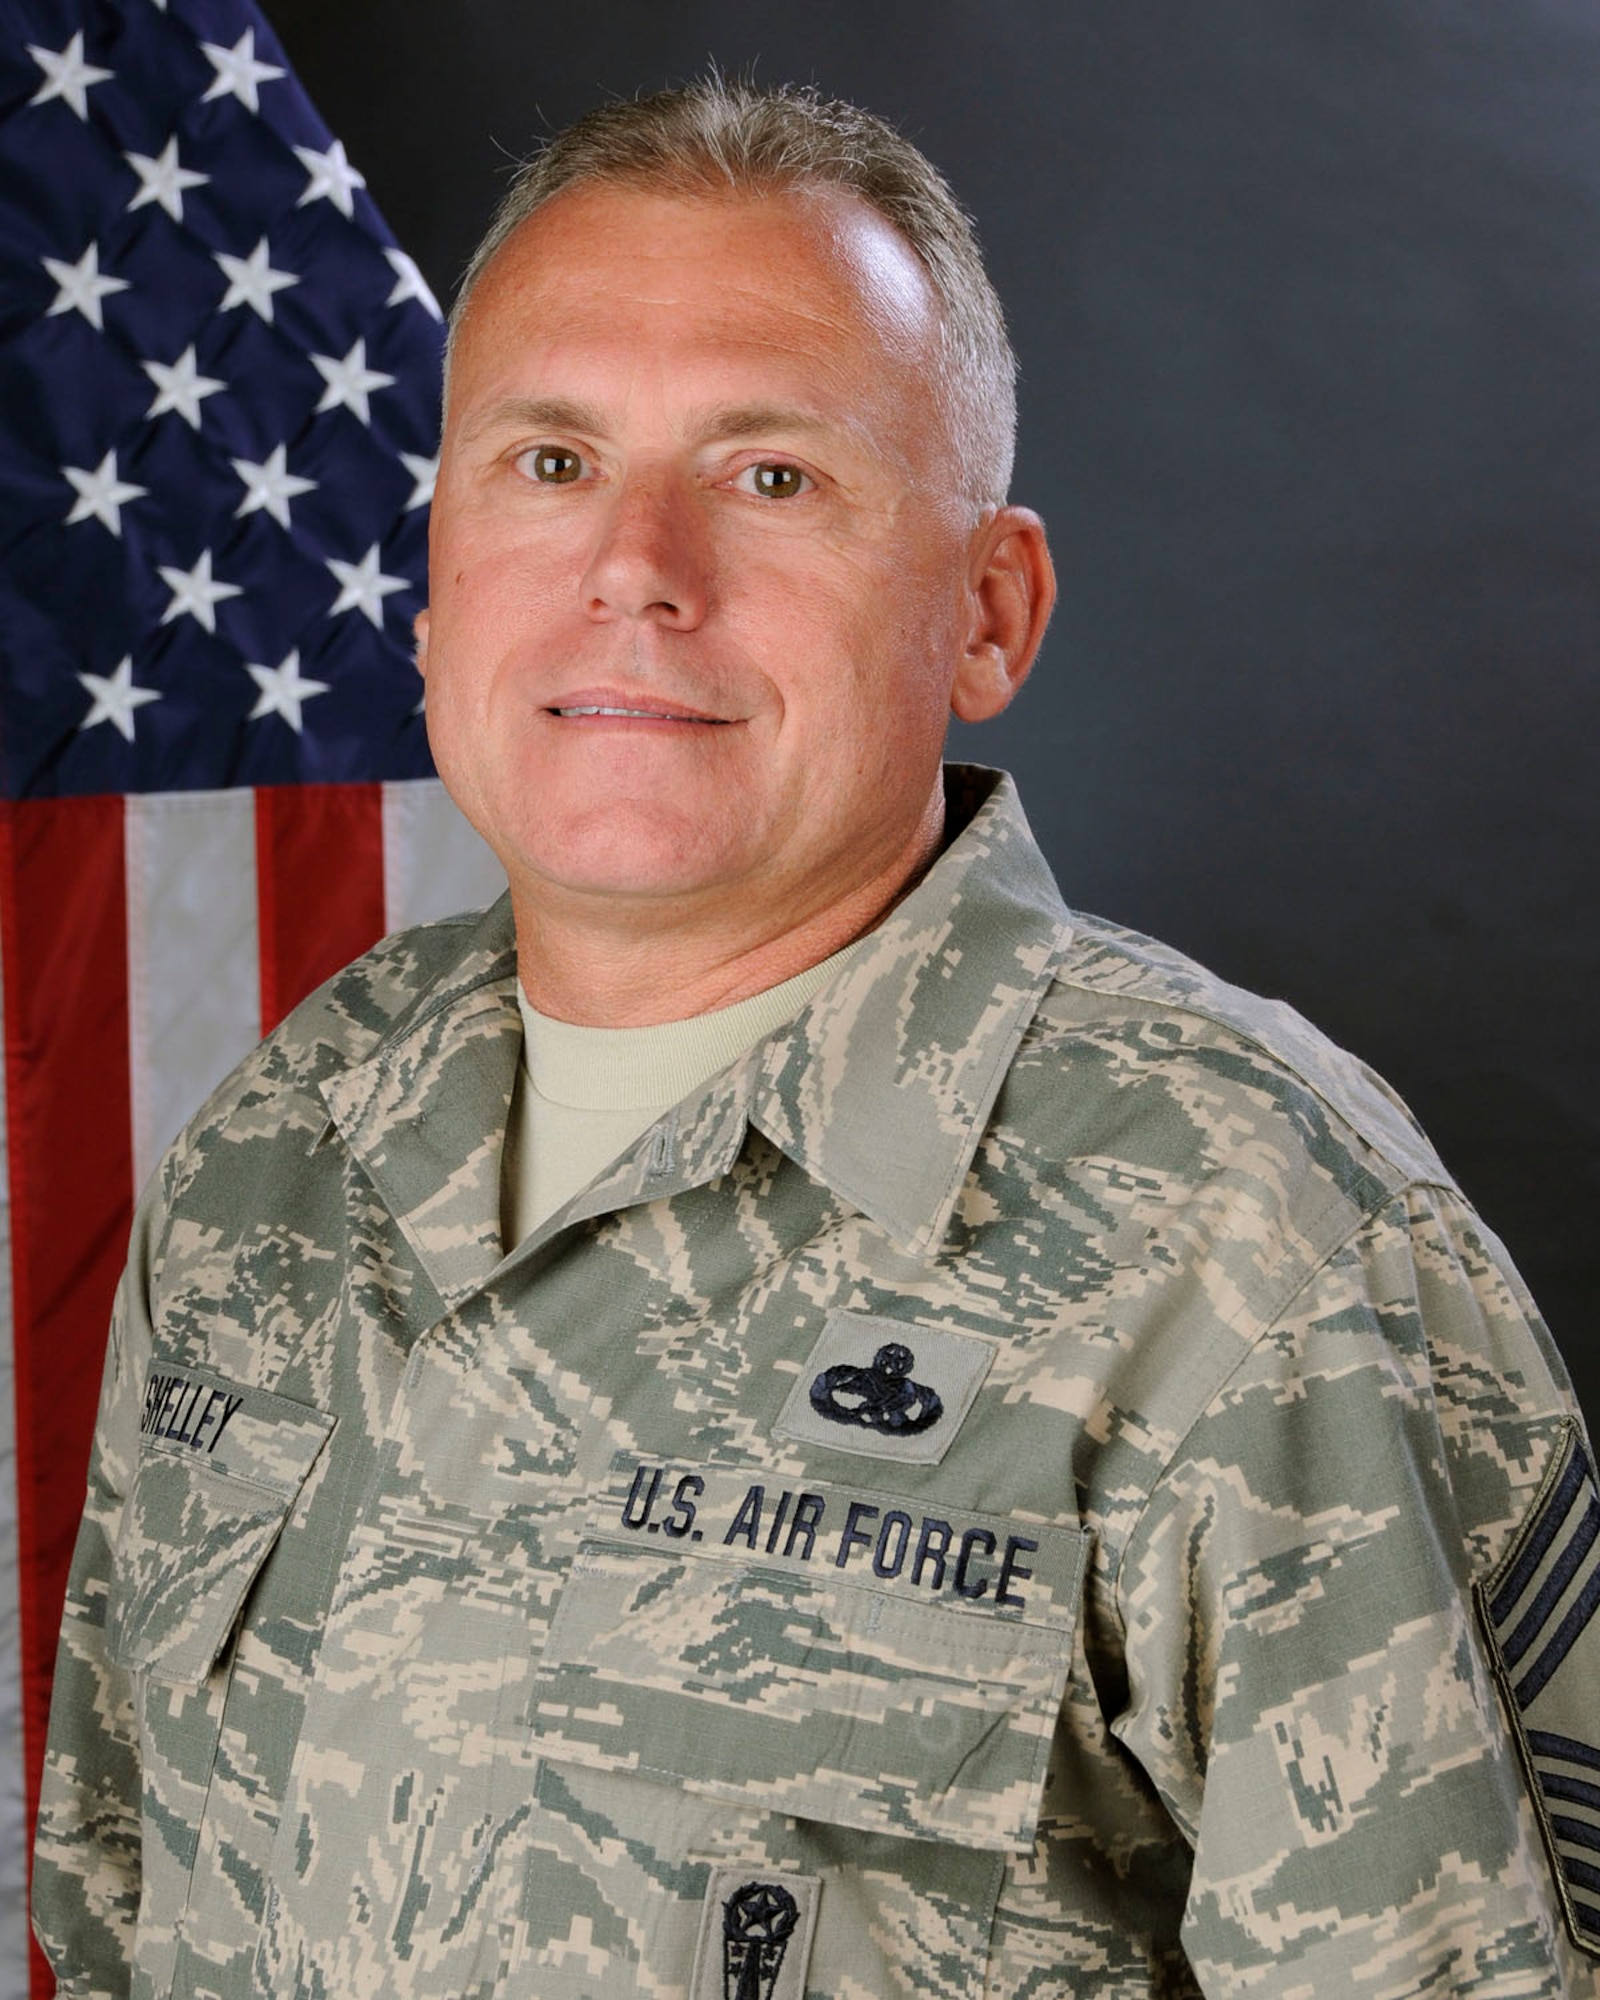 U.S. Air Force Chief Master Sgt. Daniel Shelley, with the 169th Aircraft Maintenance Squadron, South Carolina Air National Guard at McEntire Joint National Guard Base, S.C., poses for his portrait May 29, 2013.  (U.S. Air National Guard photo by Tech. Sgt. Caycee Watson/Released)